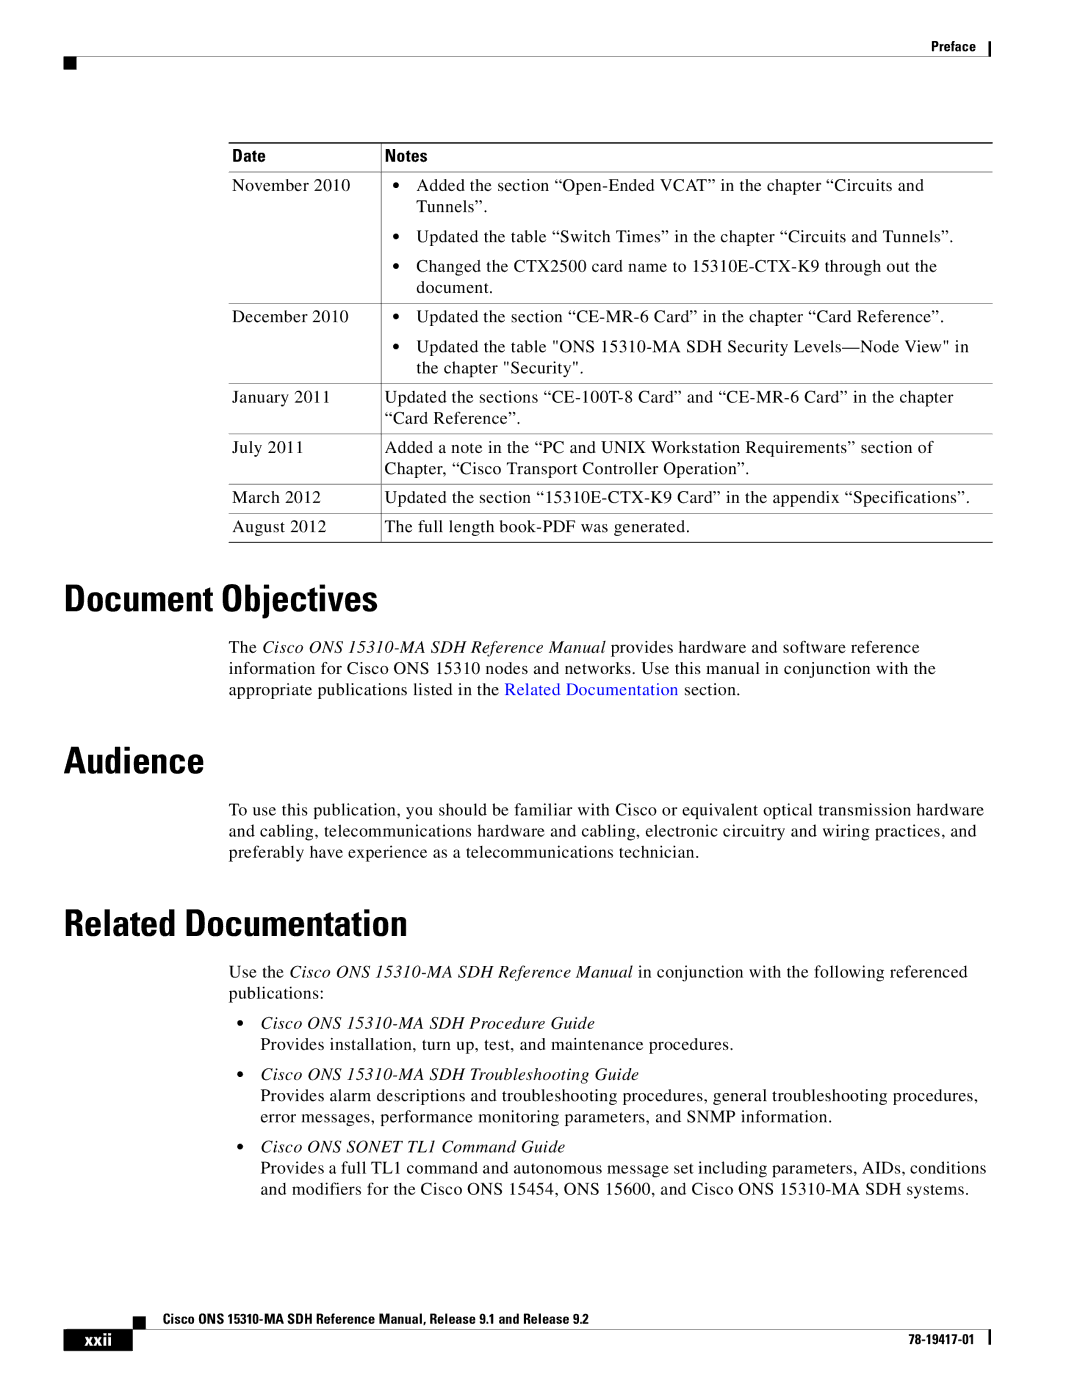 Cisco Systems 15310-MA manual Document Objectives, Audience, Related Documentation, Xxii 